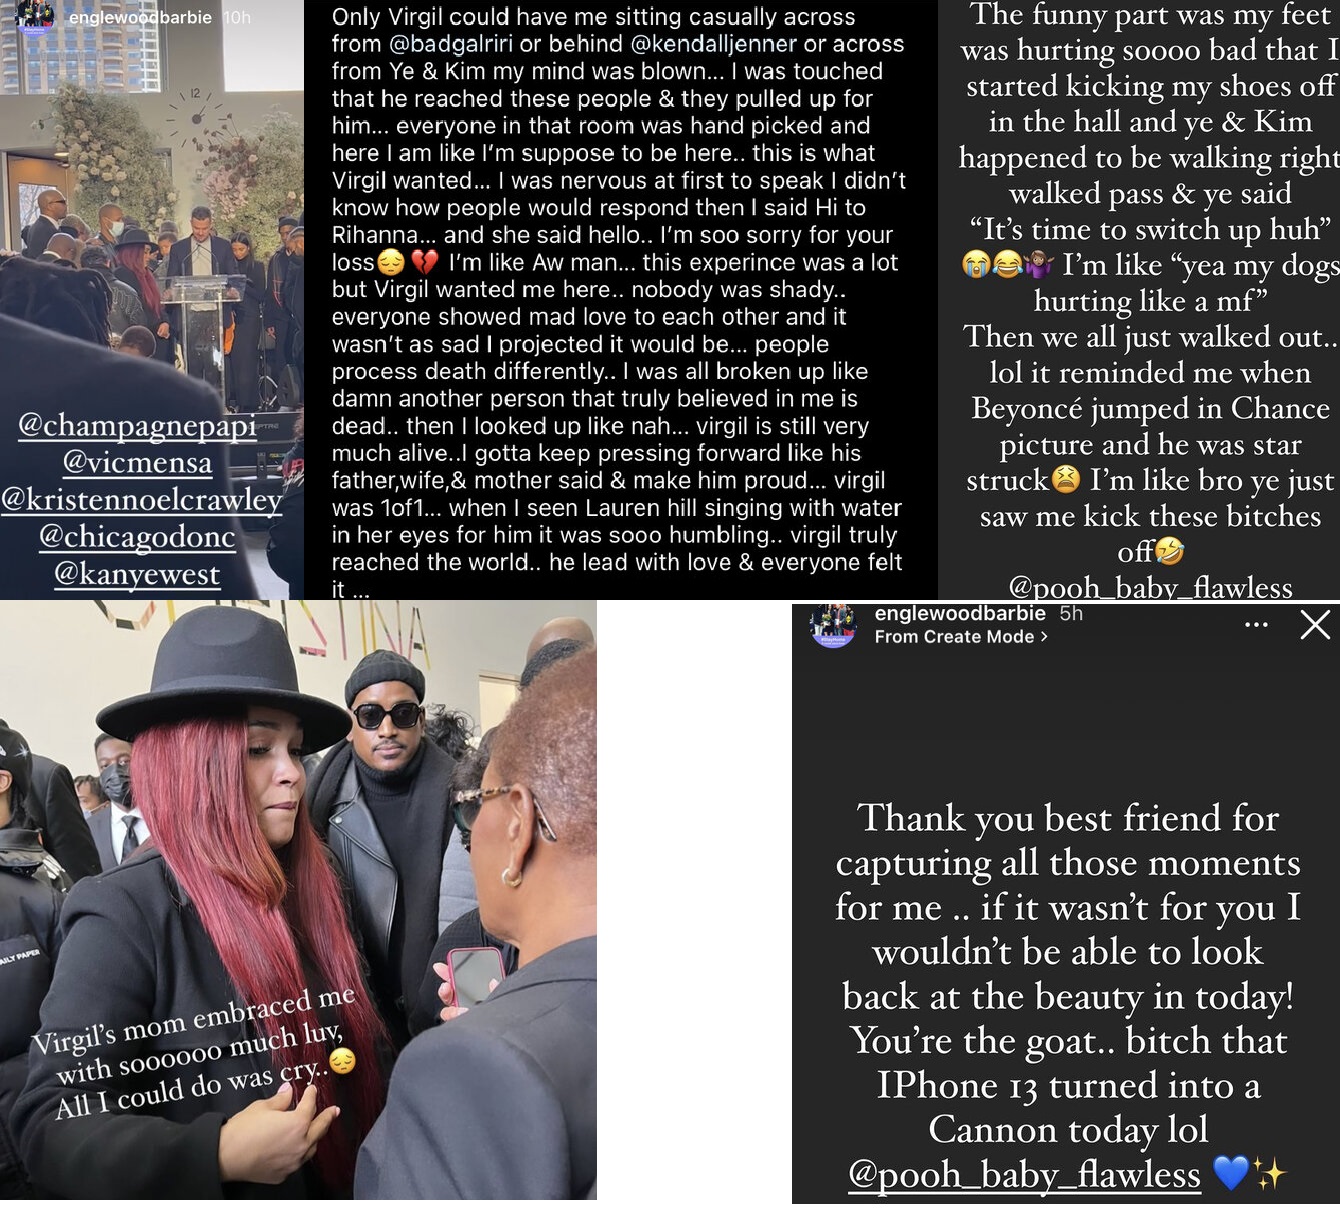 Woman attends Virgil Abloh's funeral and brags about meeting celebrities